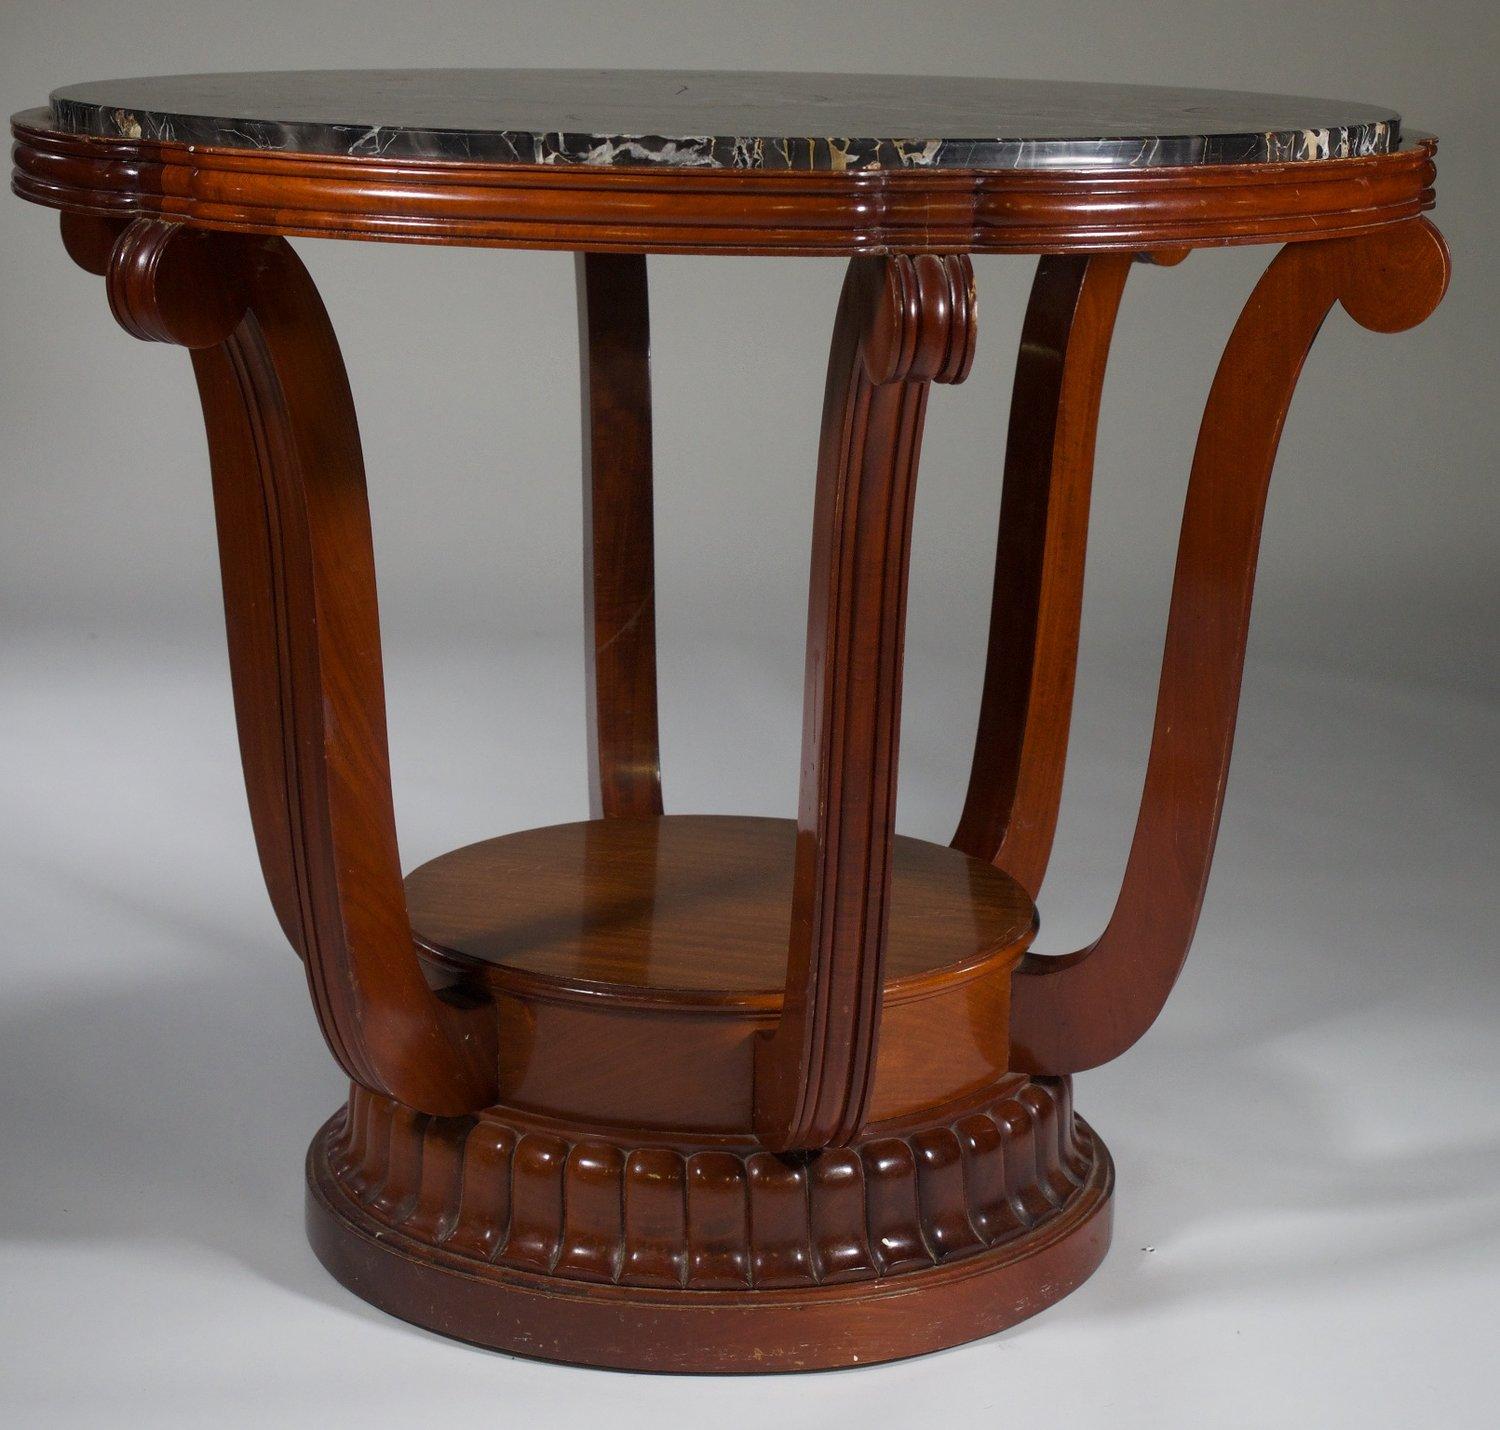 Classic French Art Deco center table by Paul Follot, circa 1925, in Cuban mahogany with original marble top. This table is 35” diameter x 25” high. Documented. Restored and refinished since photos were taken. 


PAUL FOLLOT
 (1877 - 1958)


